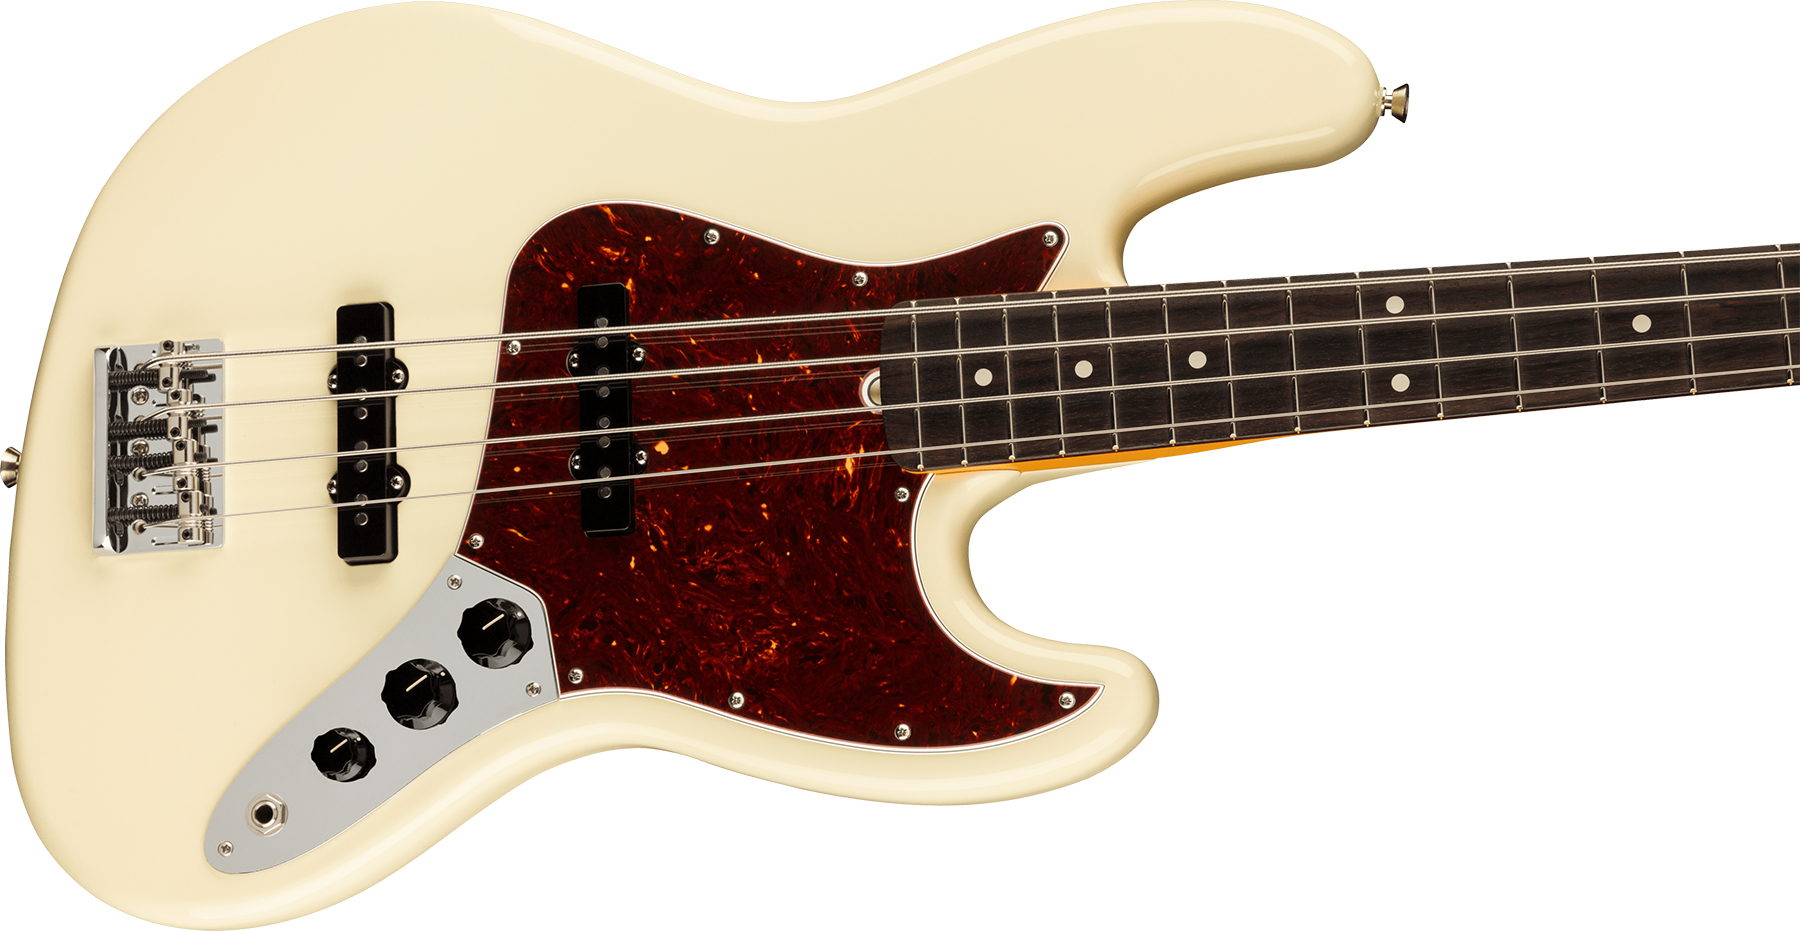 Fender Jazz Bass American Professional Ii Usa Rw - Olympic White - Solid body electric bass - Variation 2